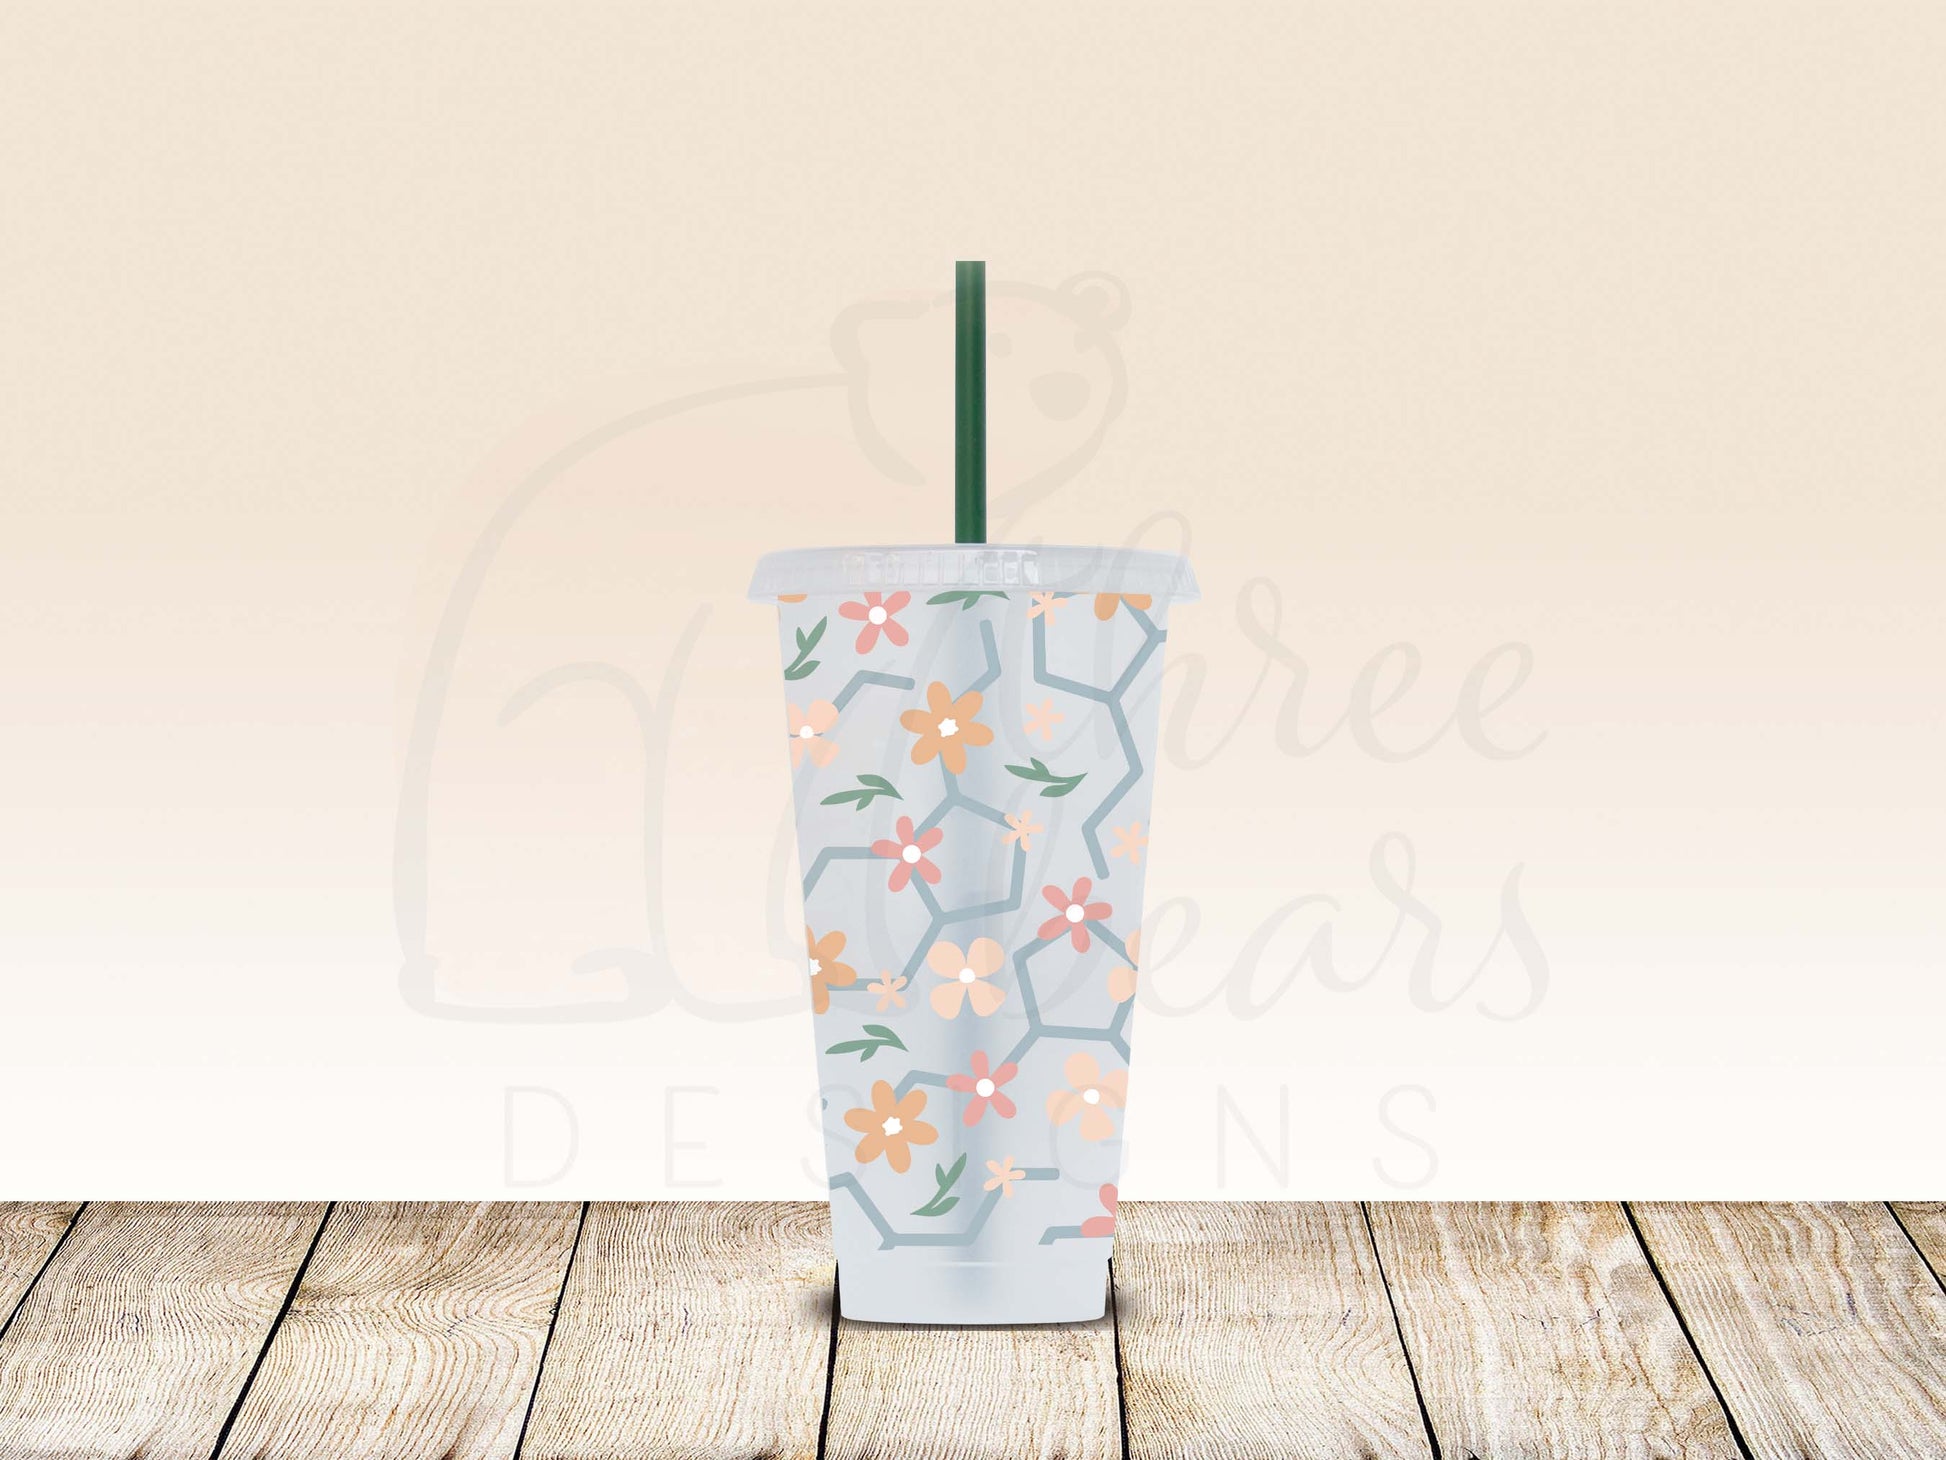 Did someone mention a straw? That's right: the 24oz Cold Tumbler